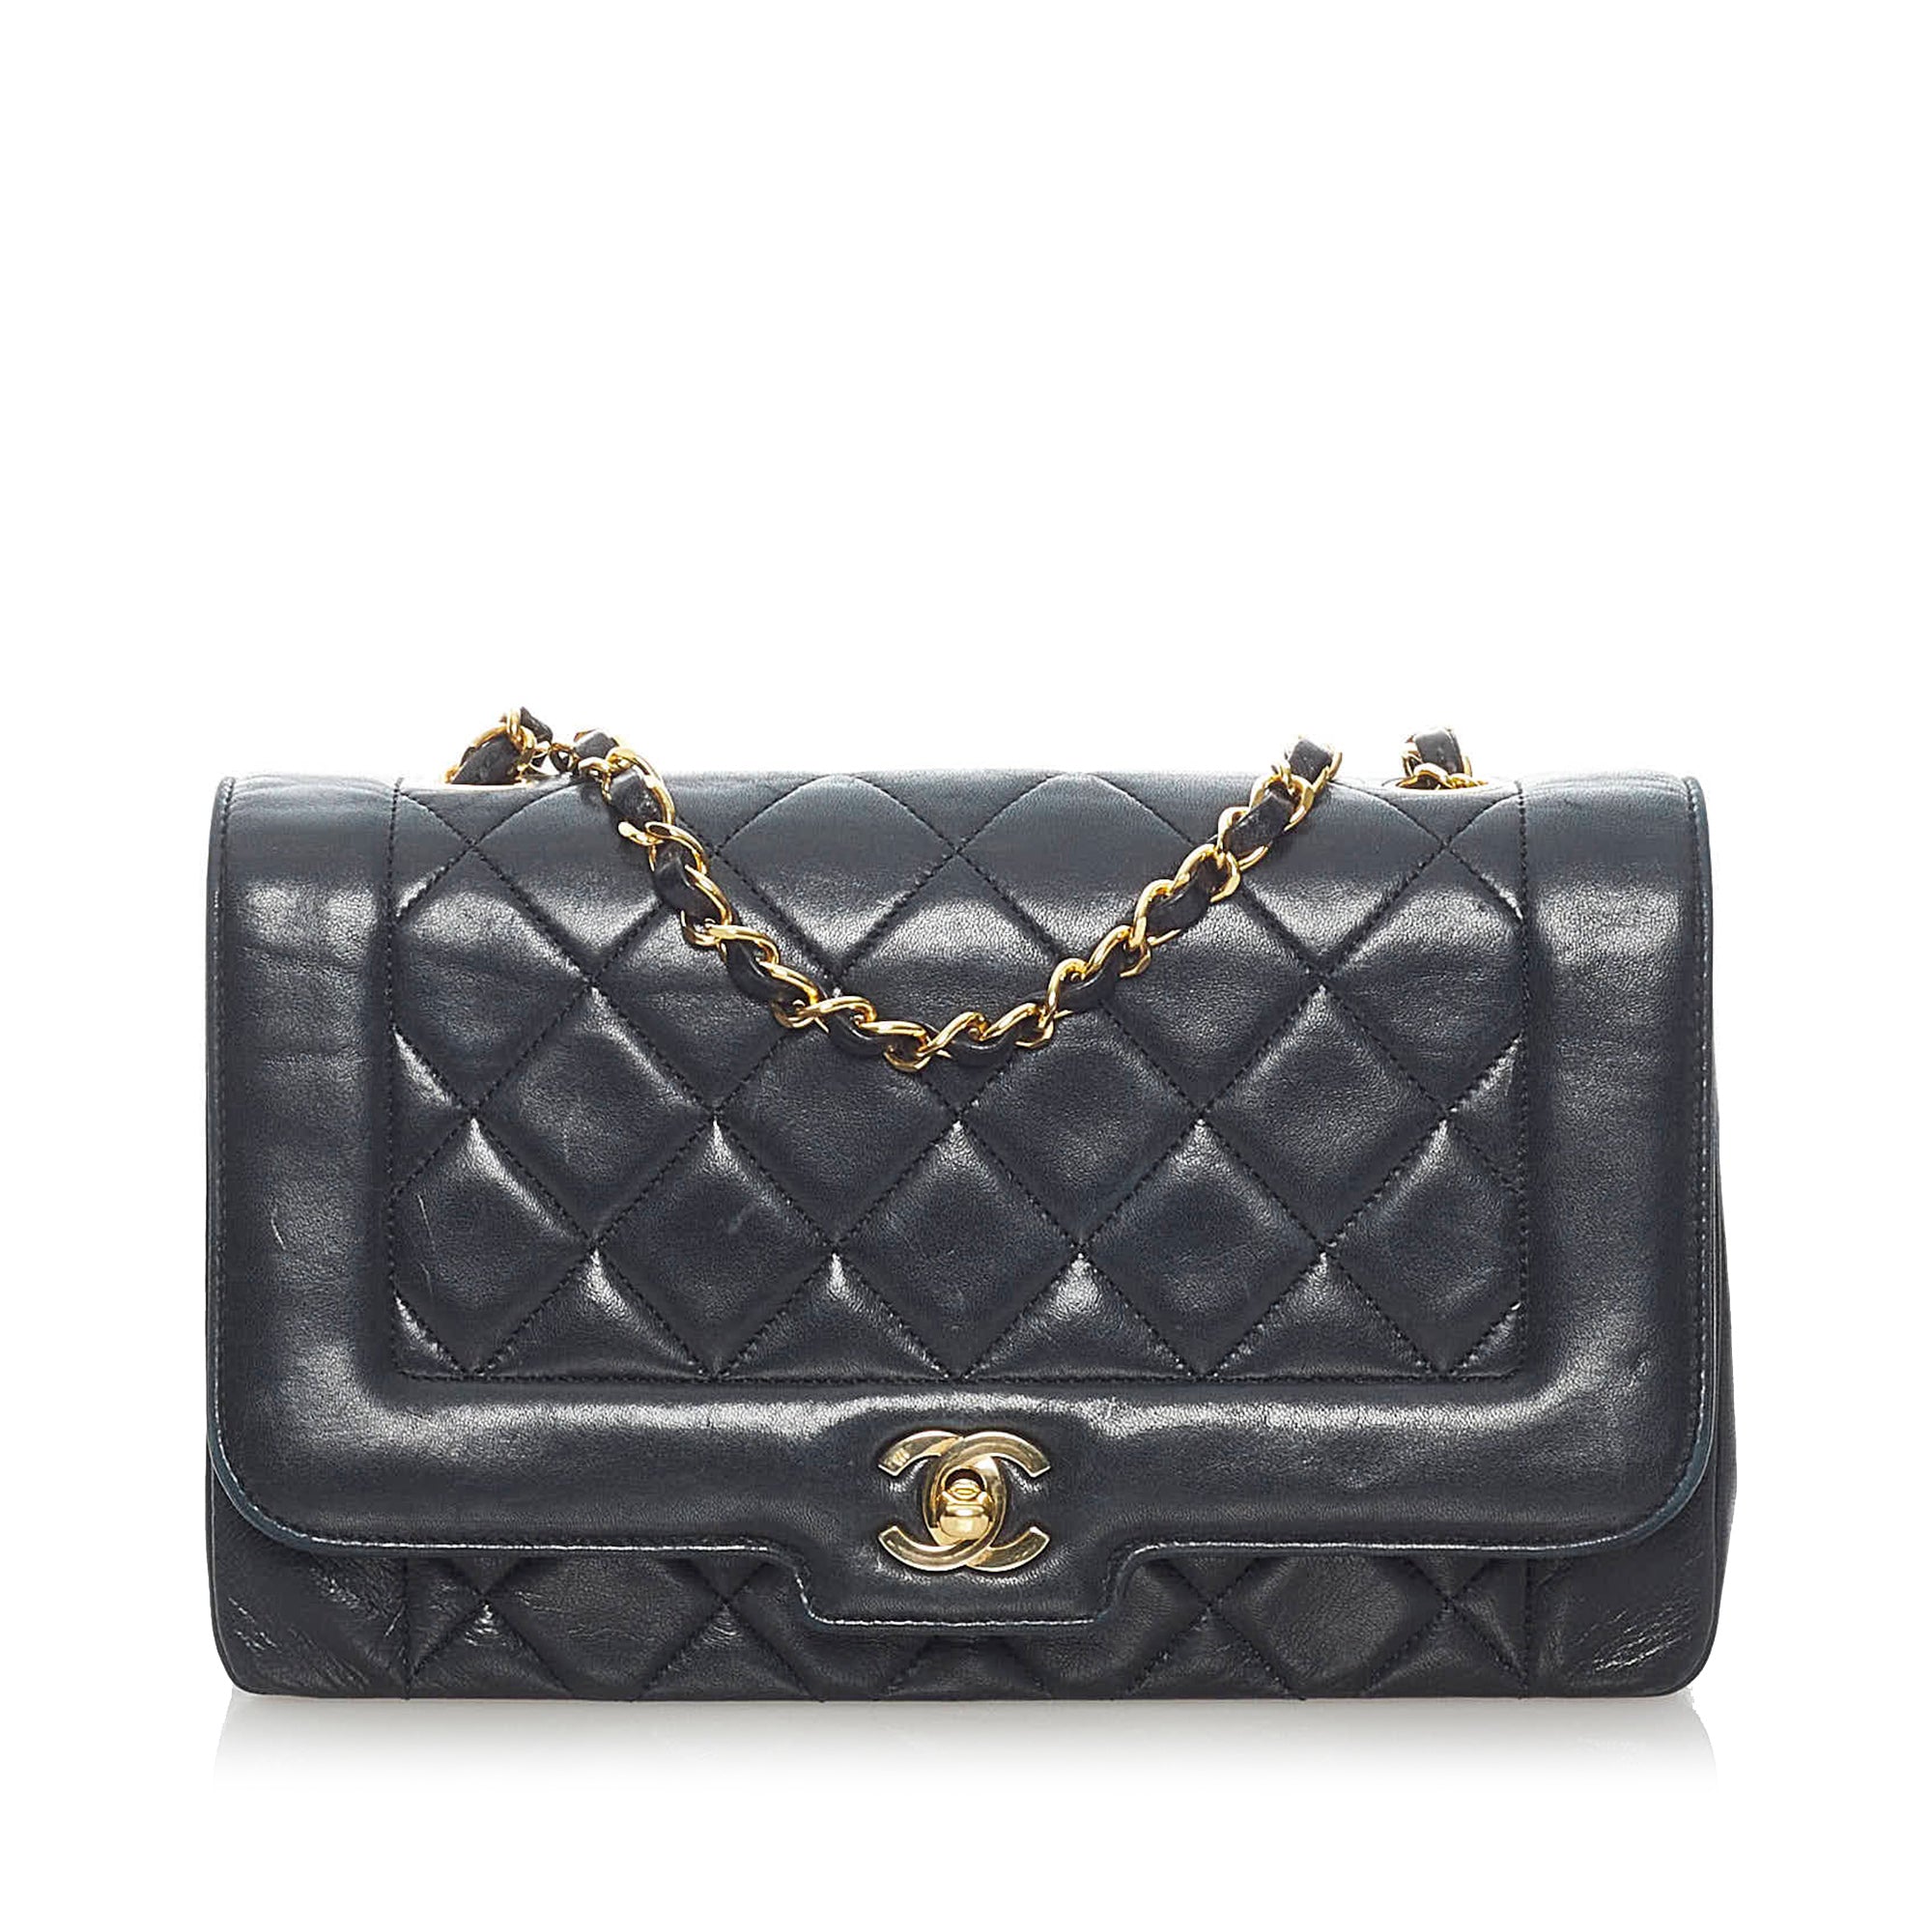 Timeless/classique leather crossbody bag Chanel Black in Leather - 34283389